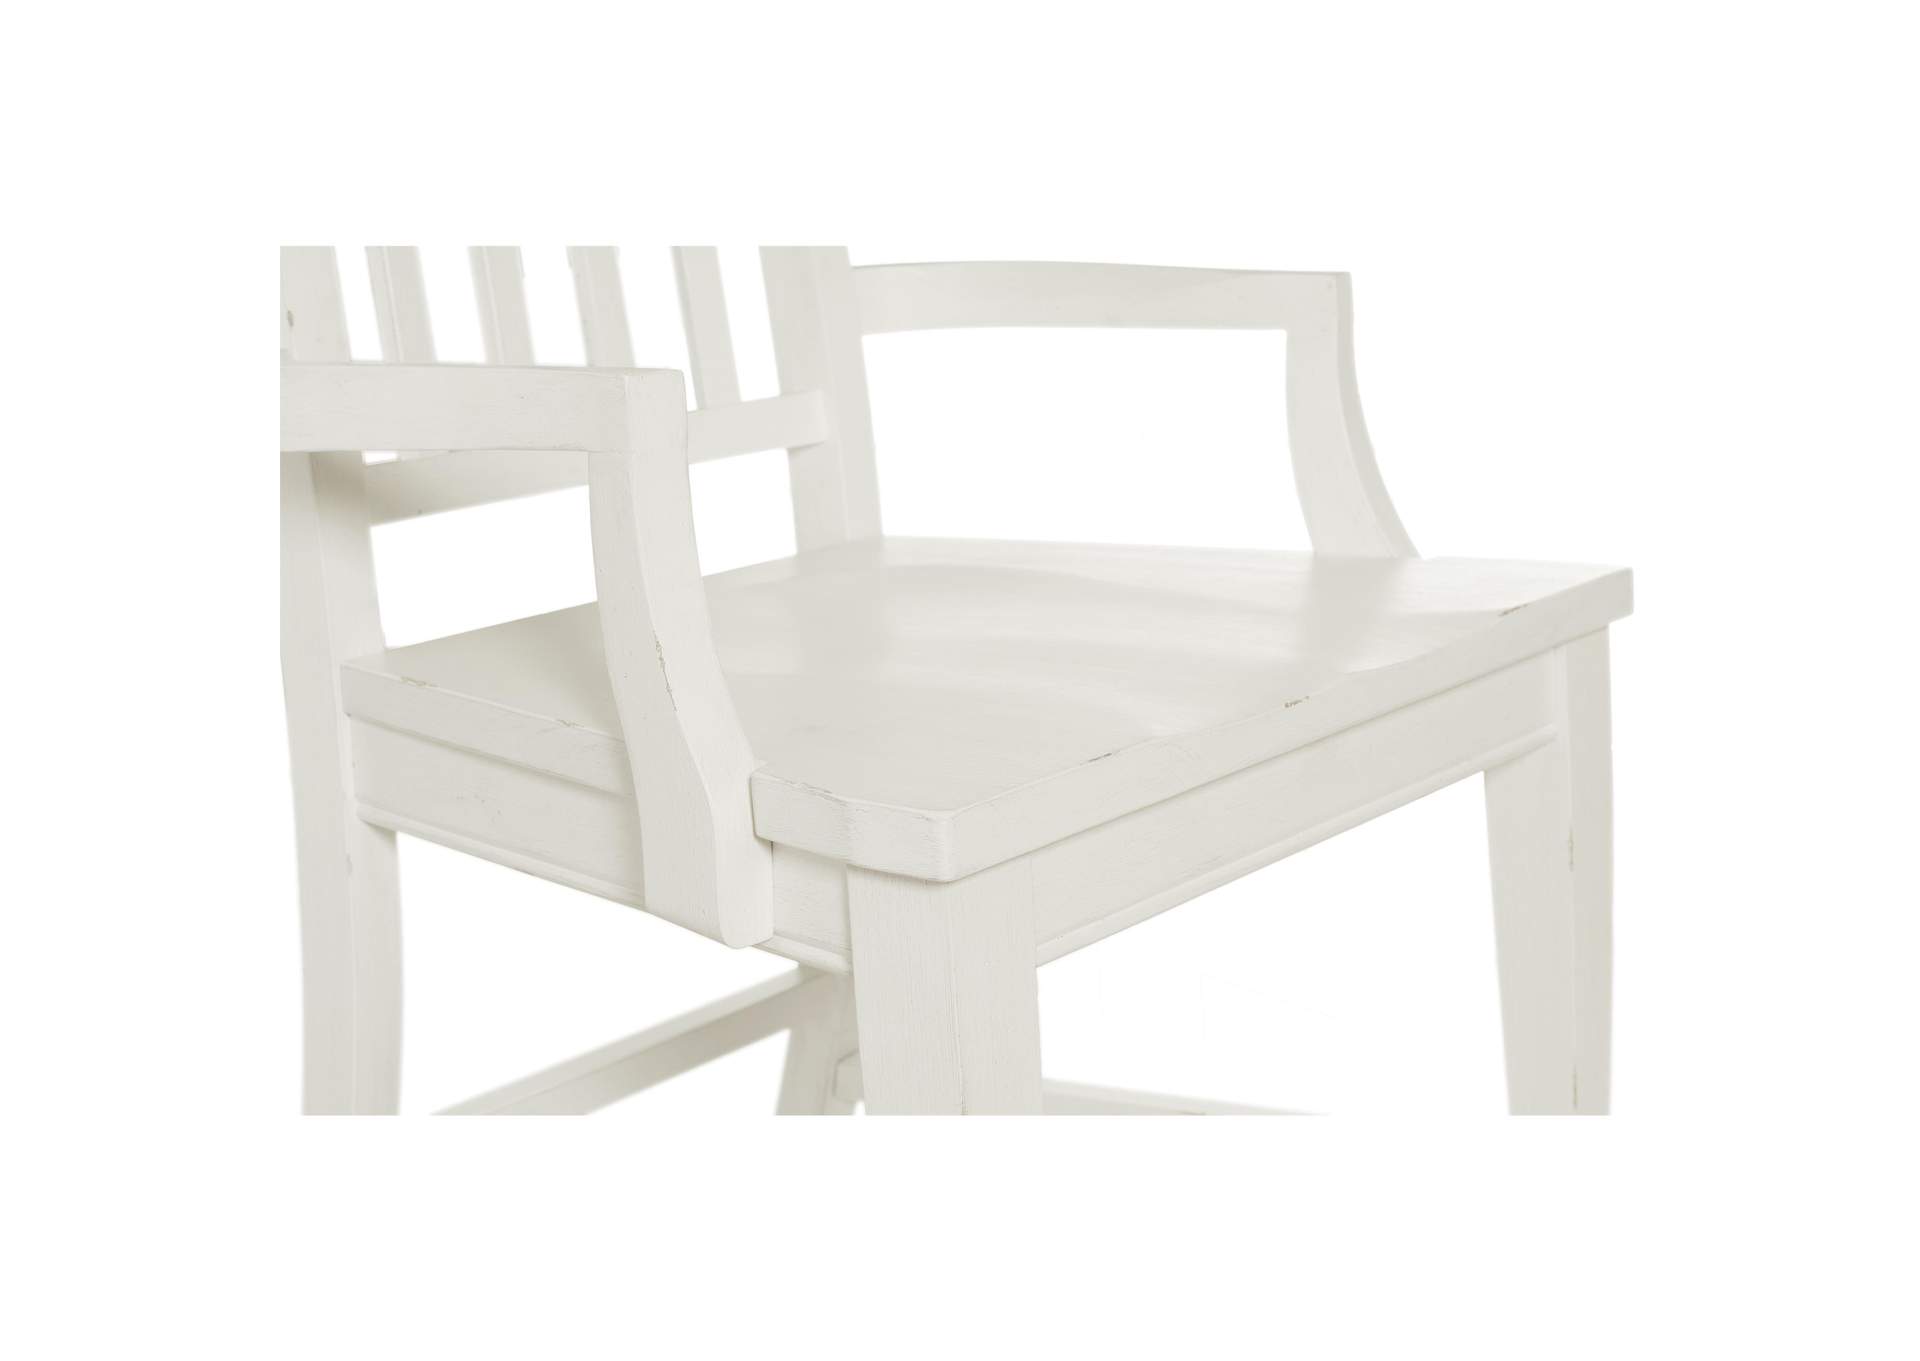 Grand Haven Feathered White Slat-Back Wood Arm Chair 2in [Set of 2],Riverside